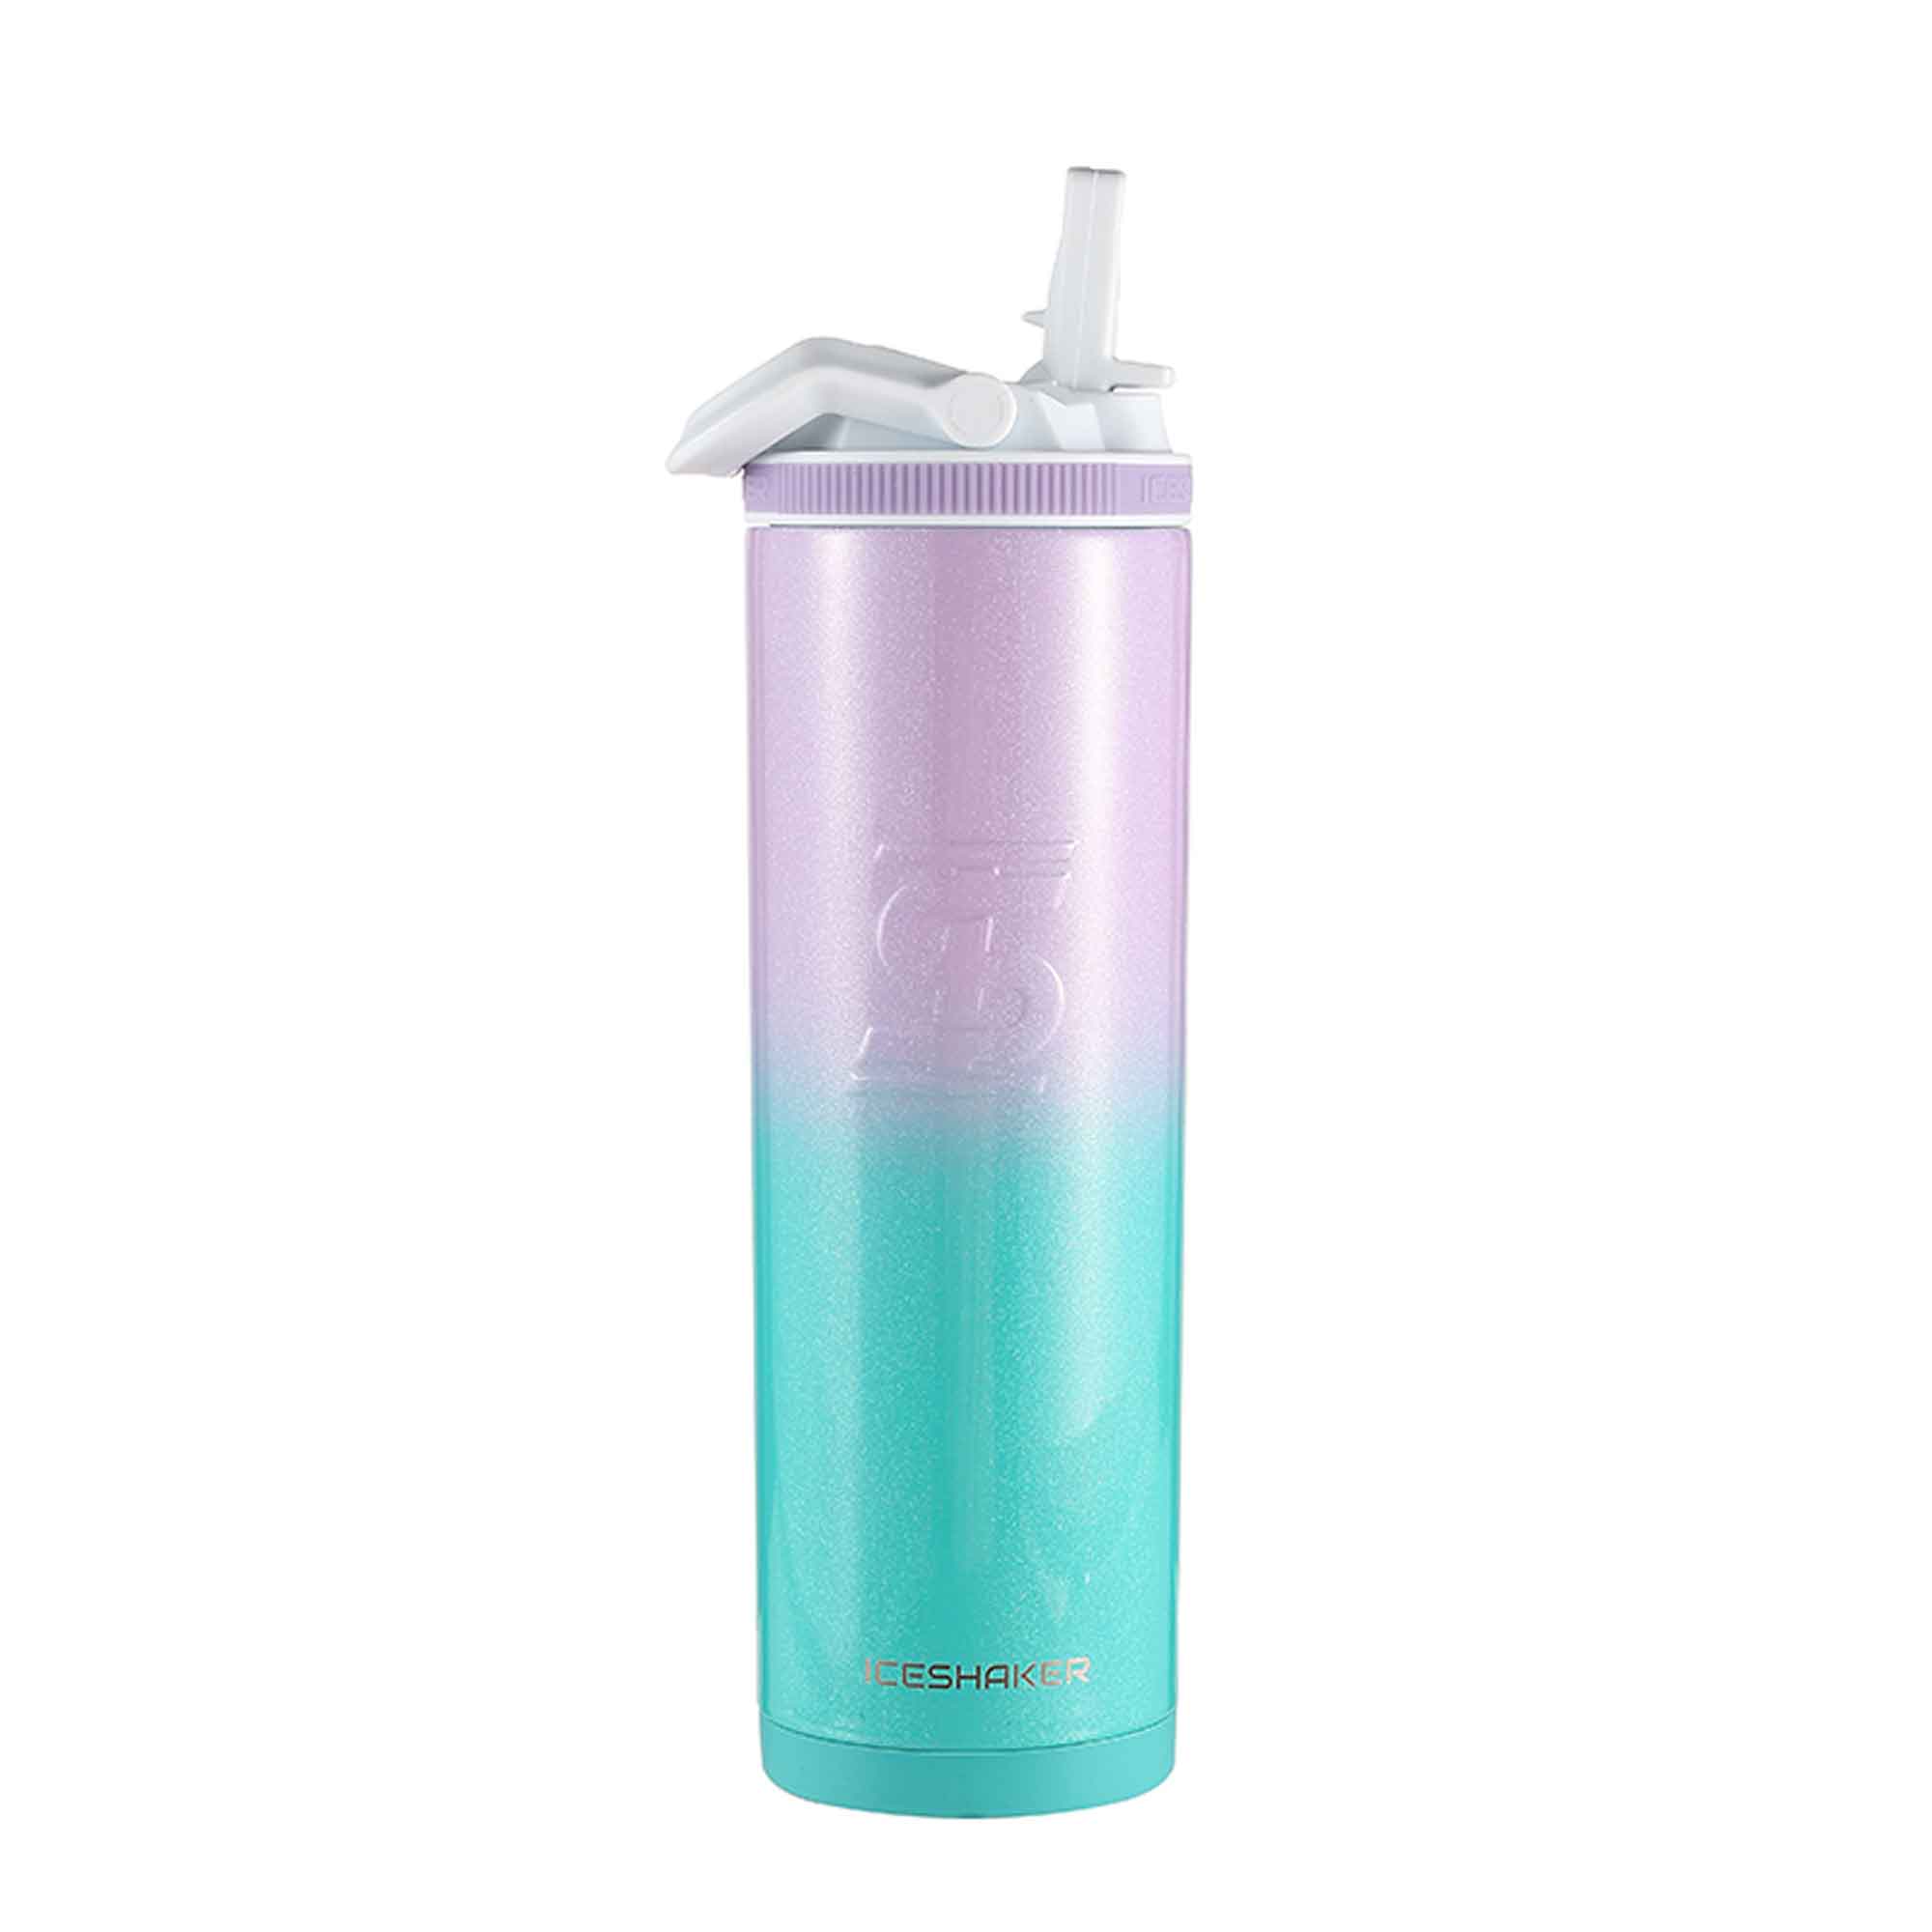 Slim Fit Water Bottle With Flip Straw Lid 24-Oz. - Personalization Available